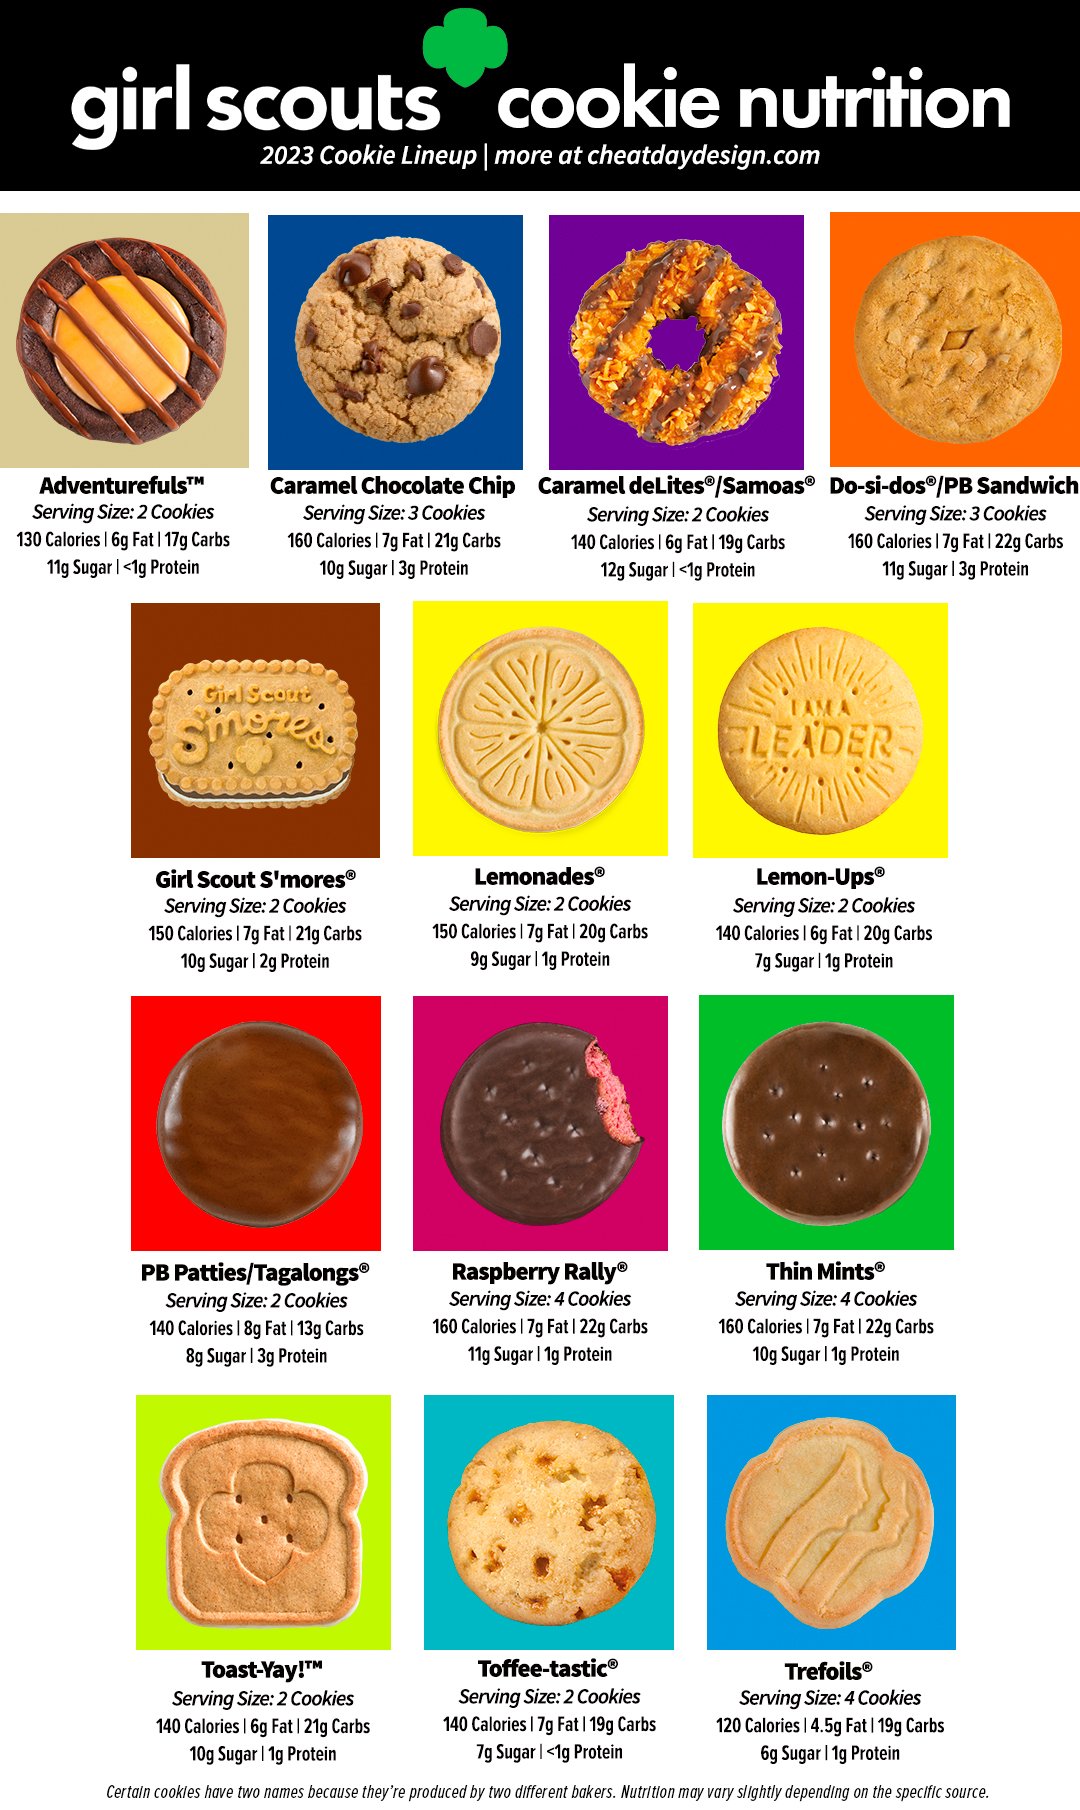 Girl Scout Cookies: Which Ones Are Vegan?